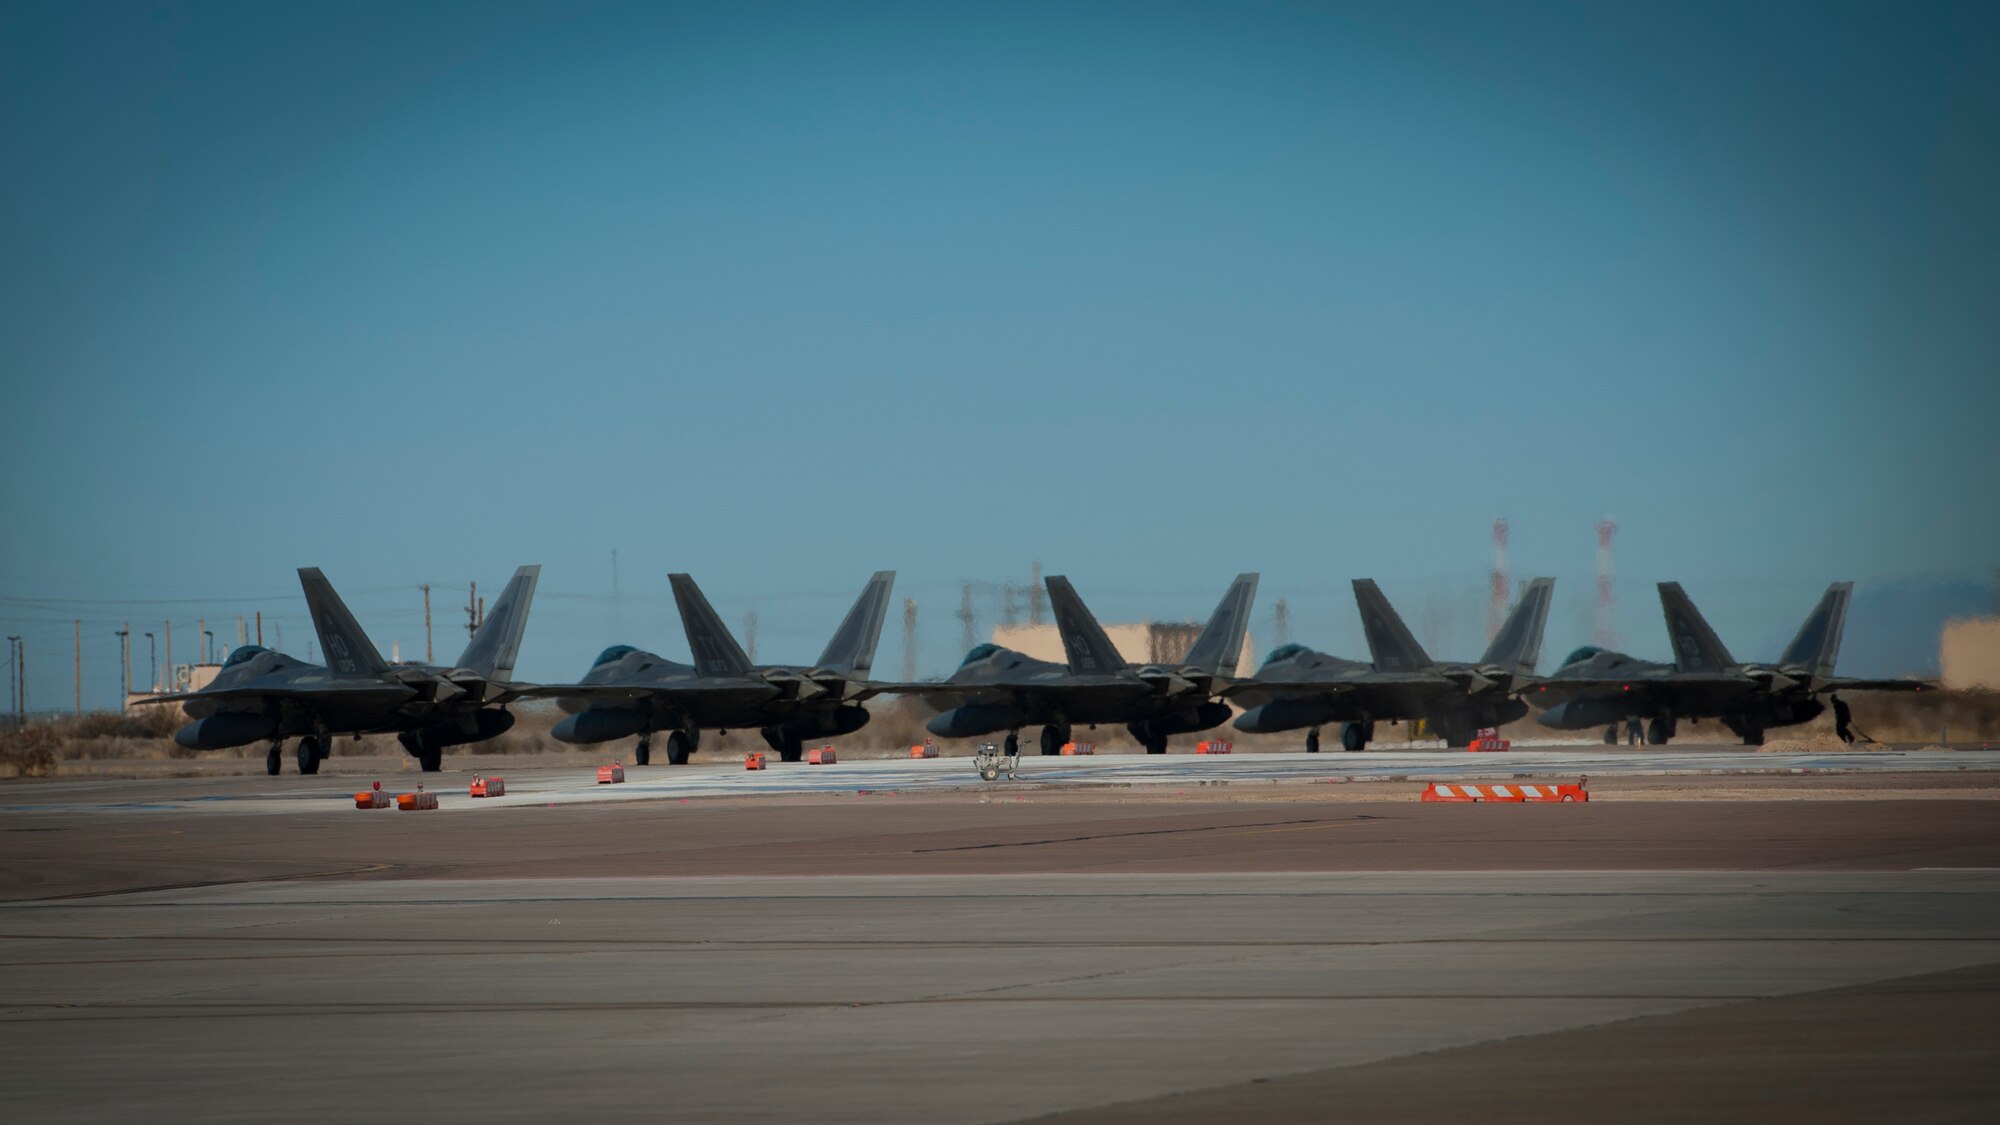 F-22 Raptors line up before taxiing down the runway at Holloman Air Force Base, N.M., Jan. 6. The first five of 24 combat-deployable F-22 Raptors left Holloman heading to Tyndall Air Force Base, Fla. as a permanent change of station. The five F-22s that left Jan. 6 will be followed by six Raptors leaving each month until the move is completed. (U.S. Air Force photo by Airman 1st Class Aaron Montoya)